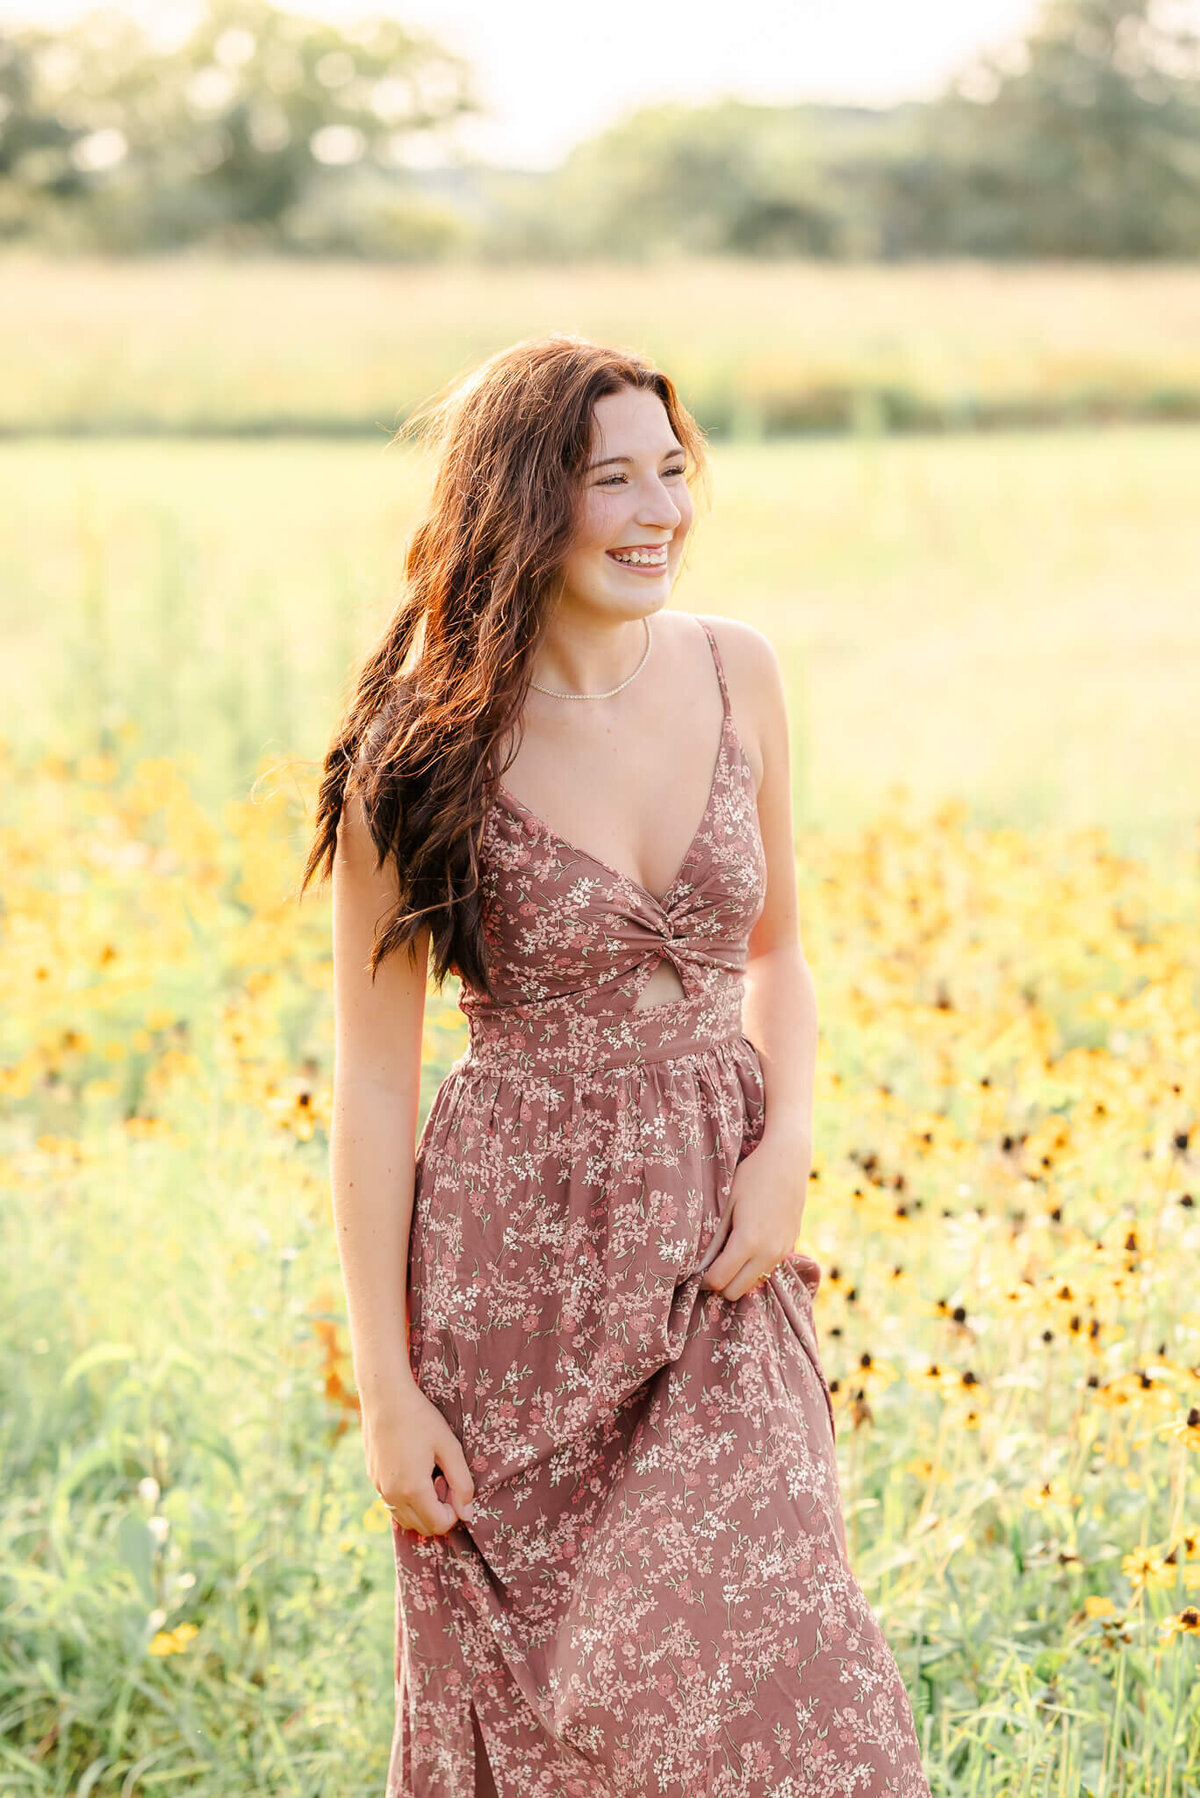 A high school senior, wearing a long floral dress, walks among some yellow flowers while laughing.